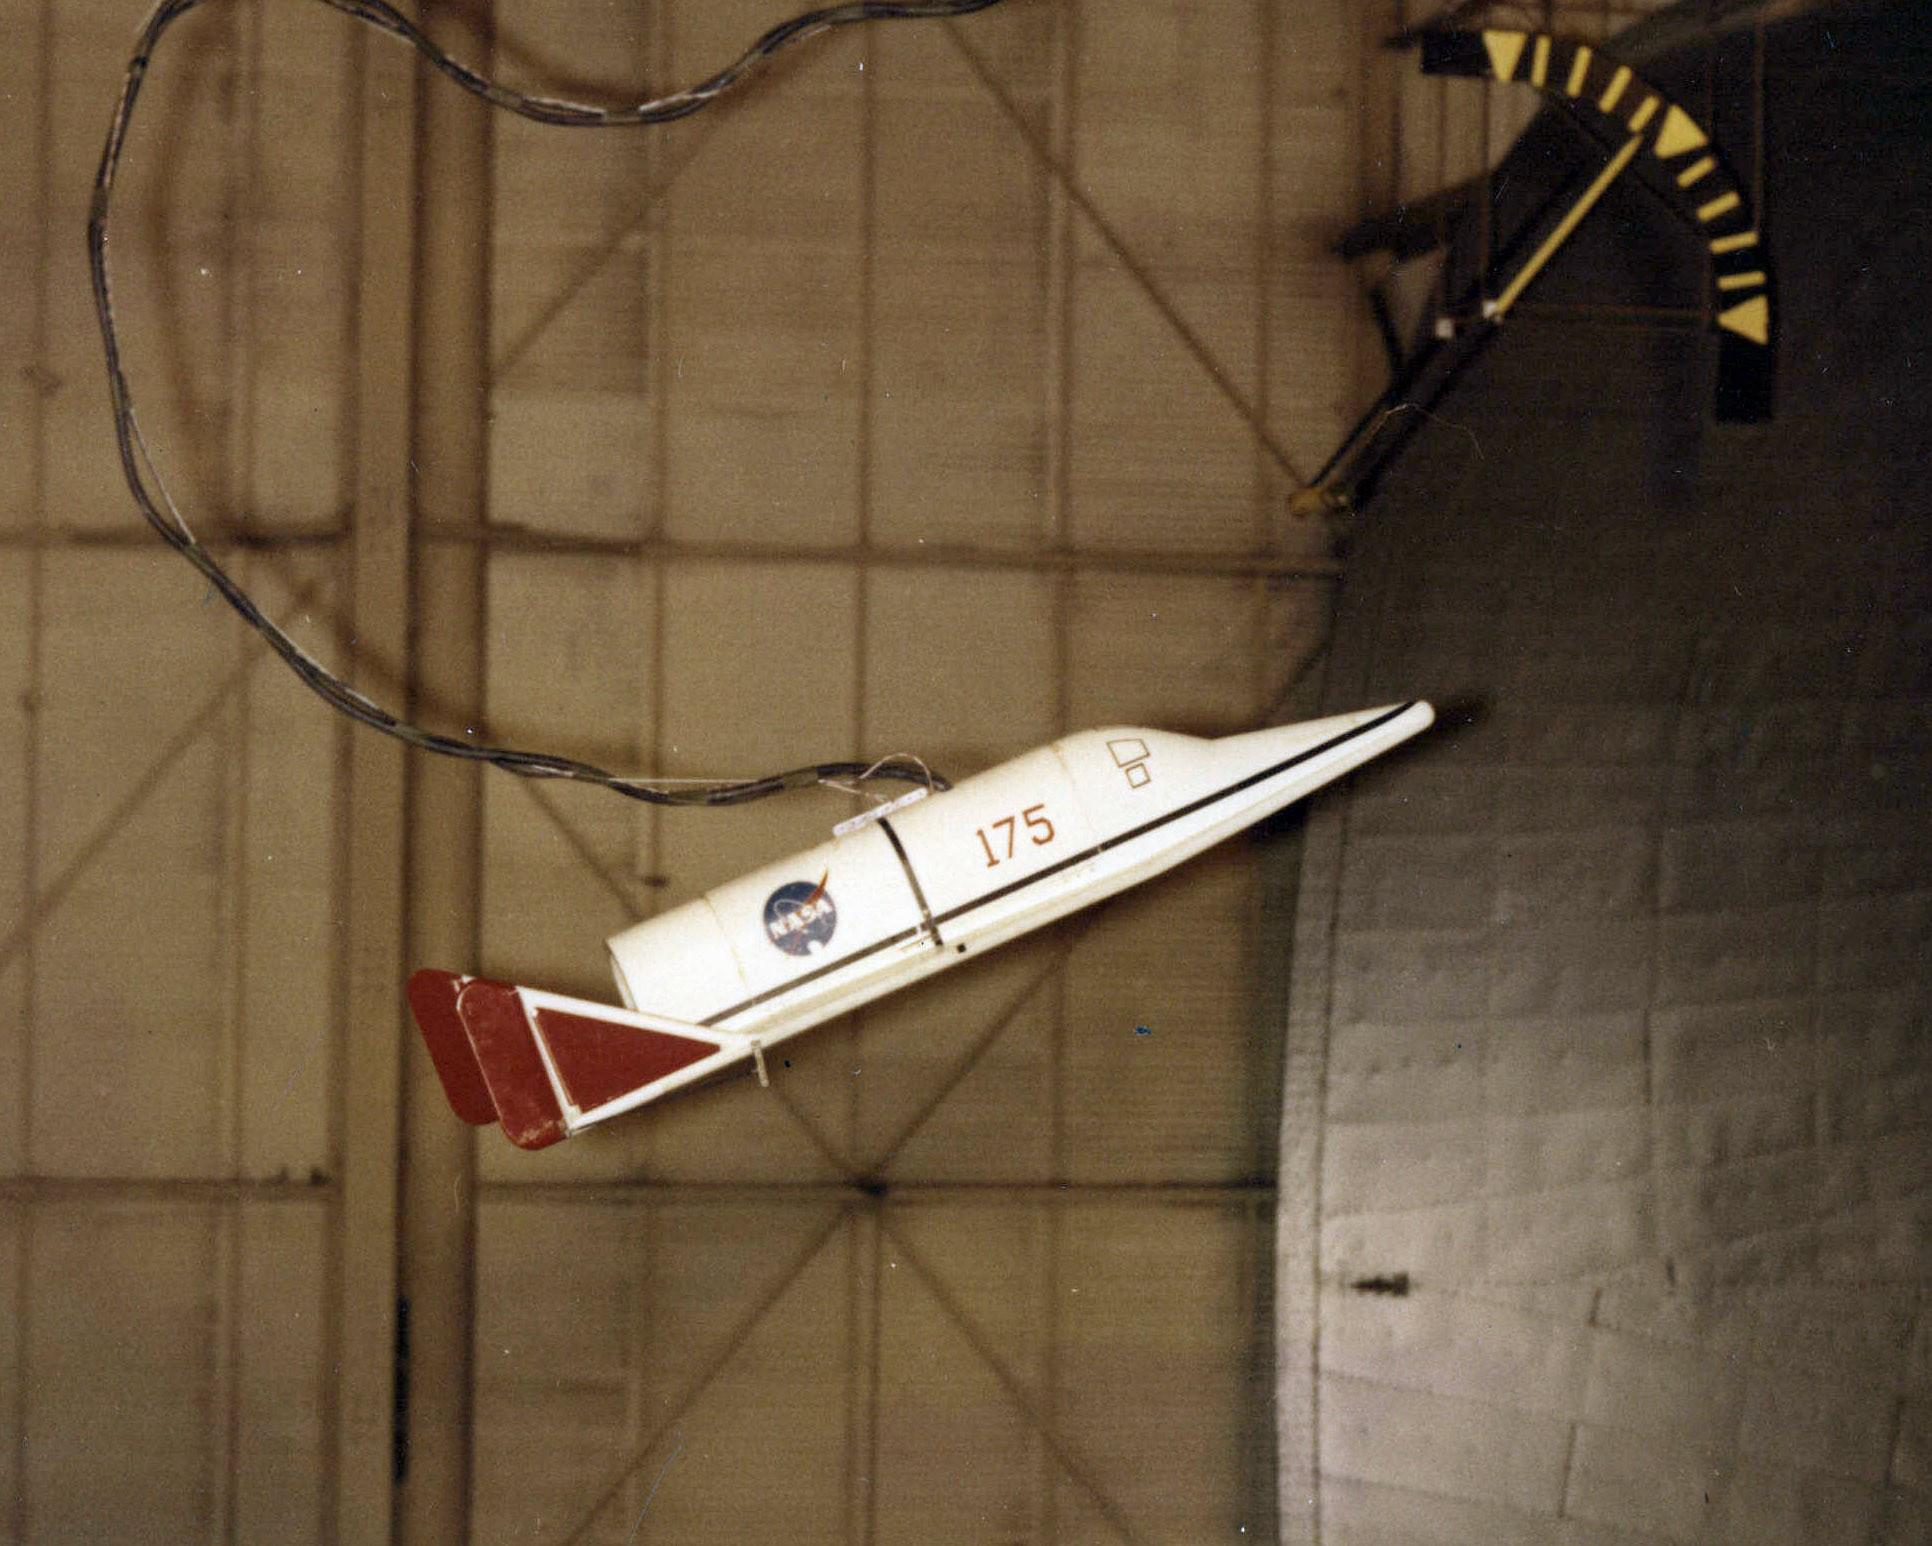 A model of the X-20 Dyna-Soar during wind tunnel testing